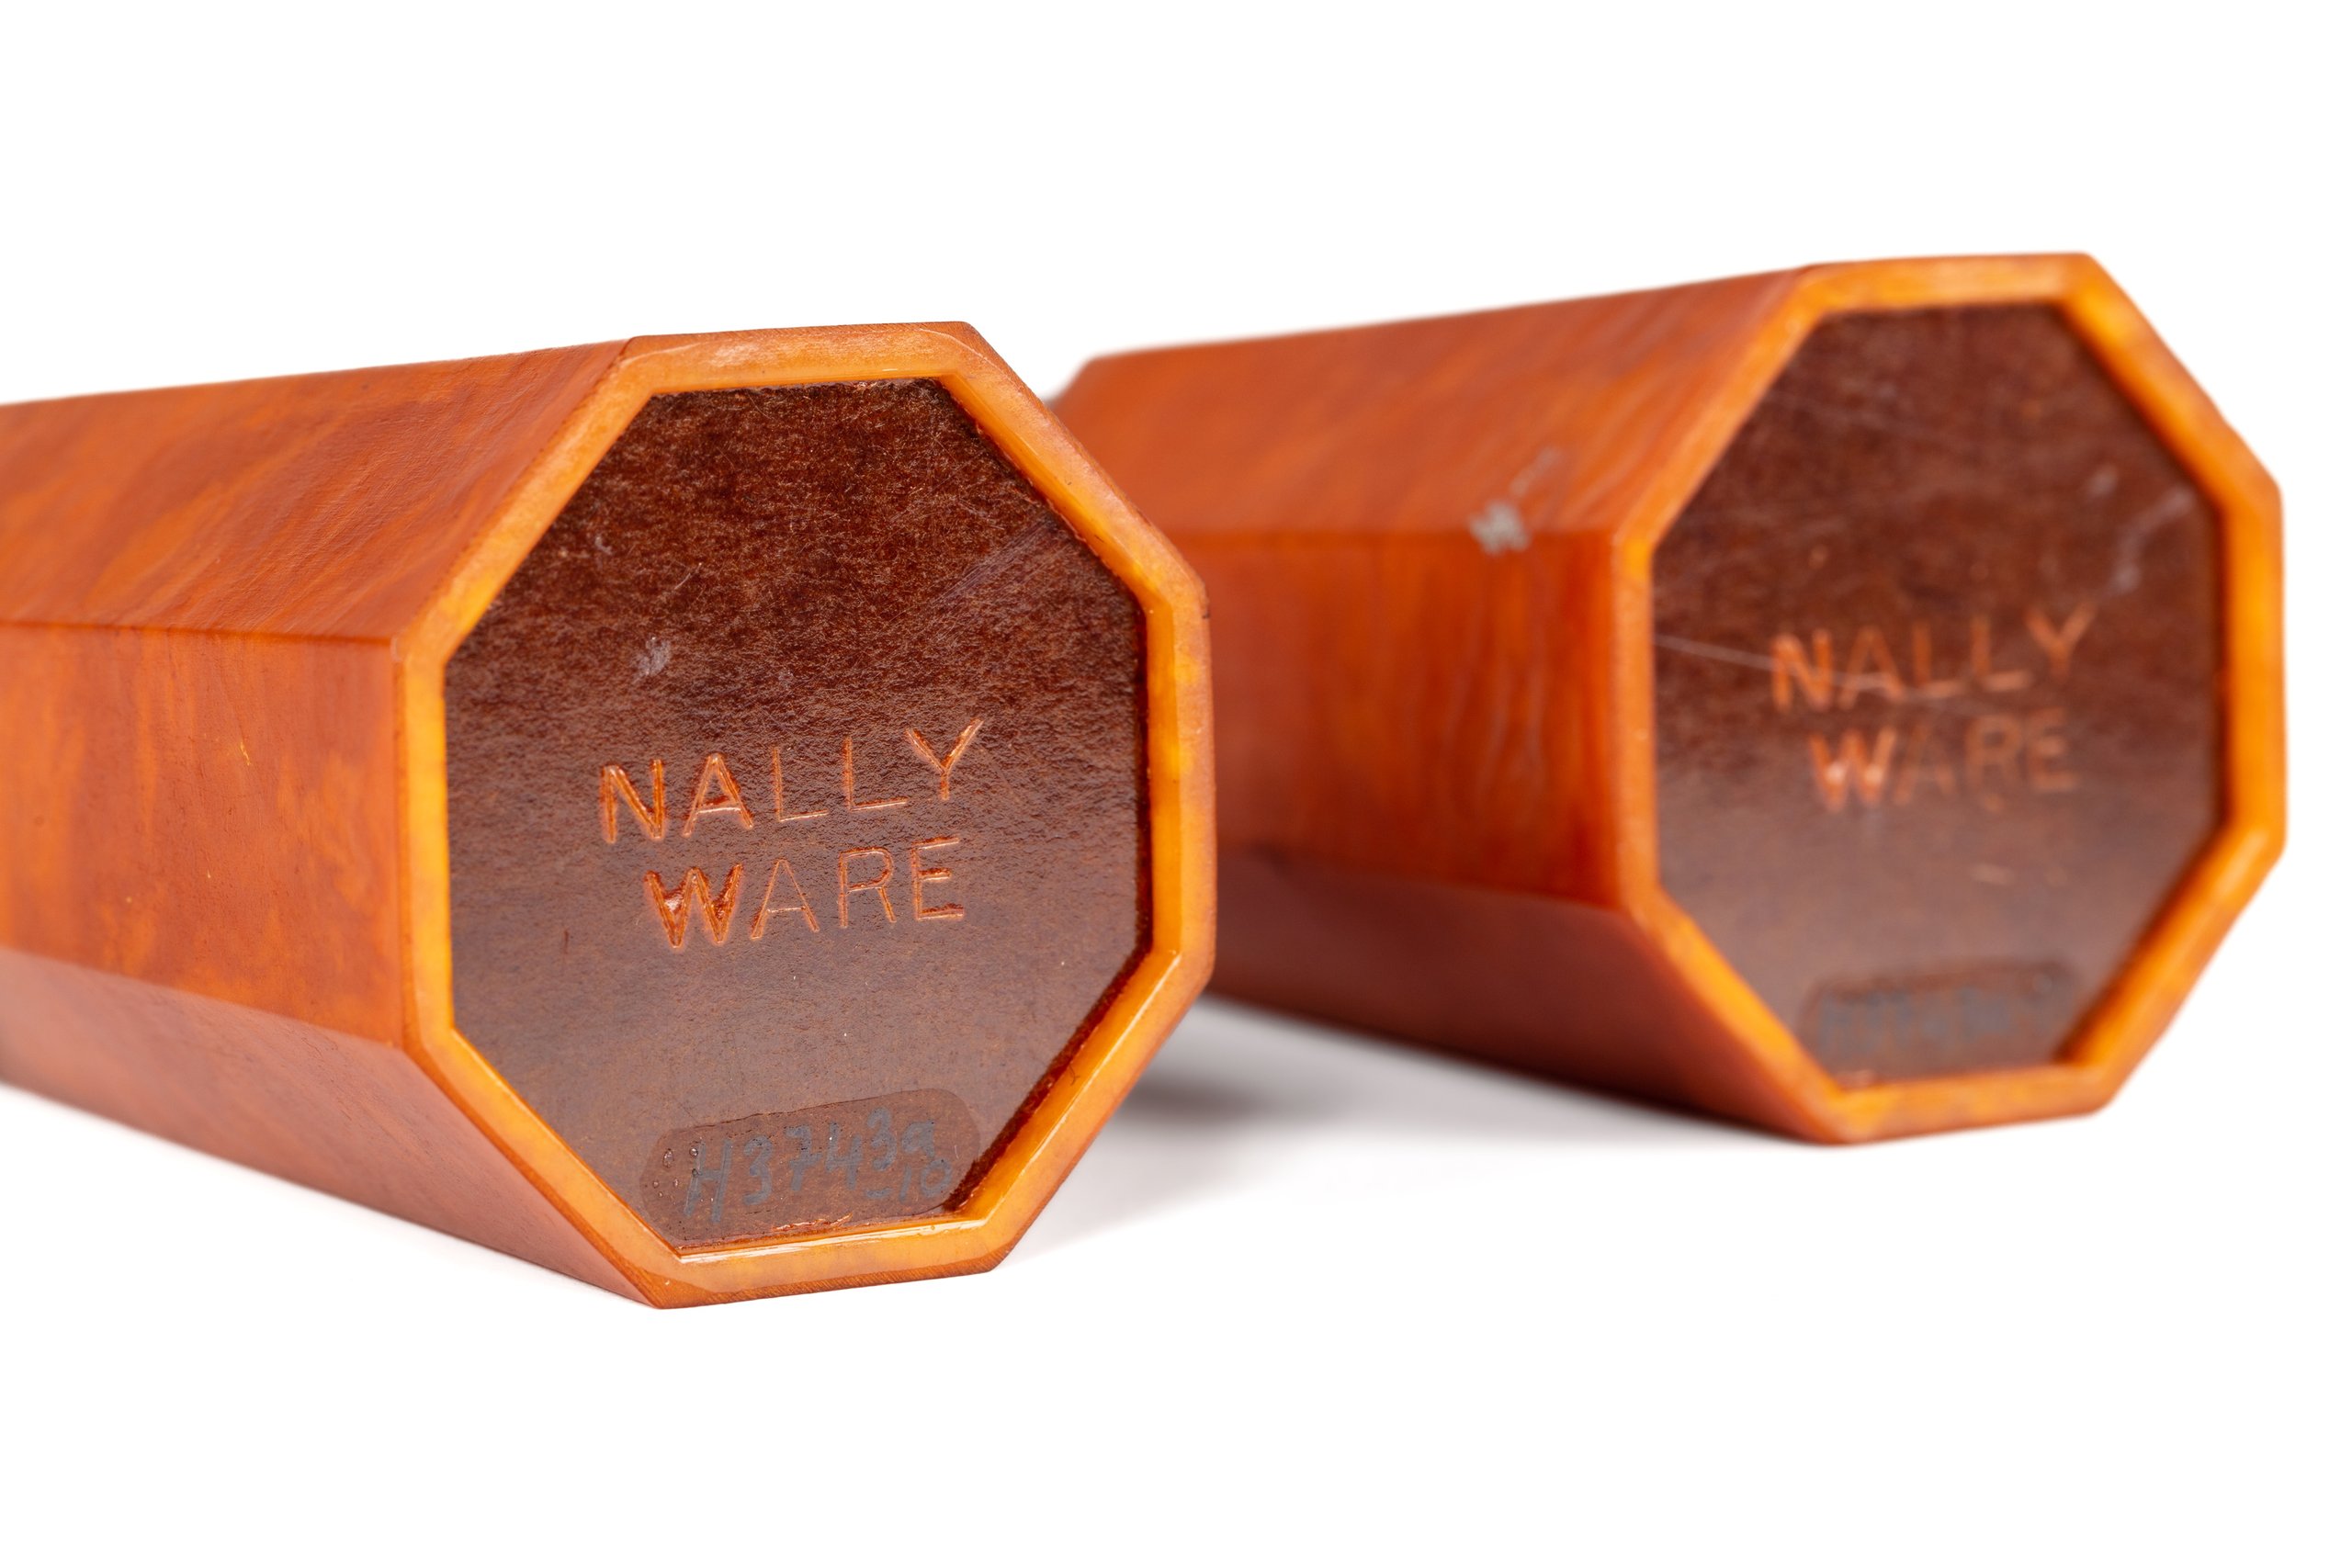 Collection of 'Nally Ware'